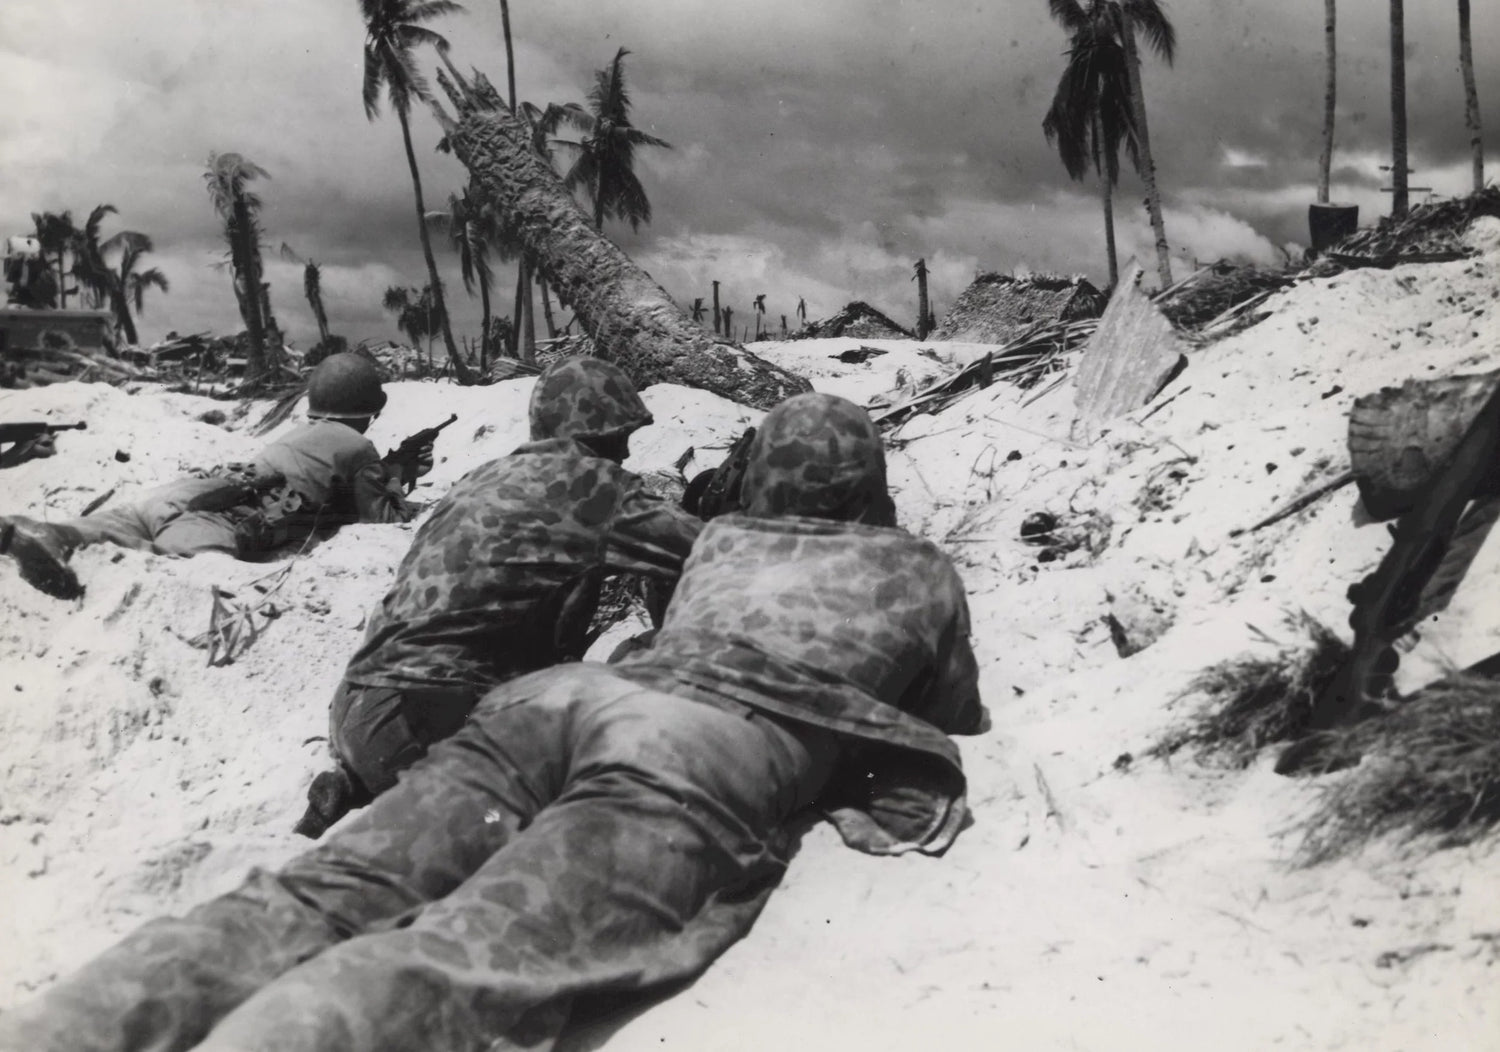 "On Tarawa Beach-Marines landing on Tarawa Island beach creep up on Jap pill boxes. The terrain of the island offered very little protective covering but these Marines made use of what little covering there was. Some of the Jap troops in pill boxes held out for two days before they surrendered or were blasted out." From the Julian C. Smith Collection (COLL/202), Marine Corps Archives & Special Collections OFFICIAL USMC PHOTOGRAPH